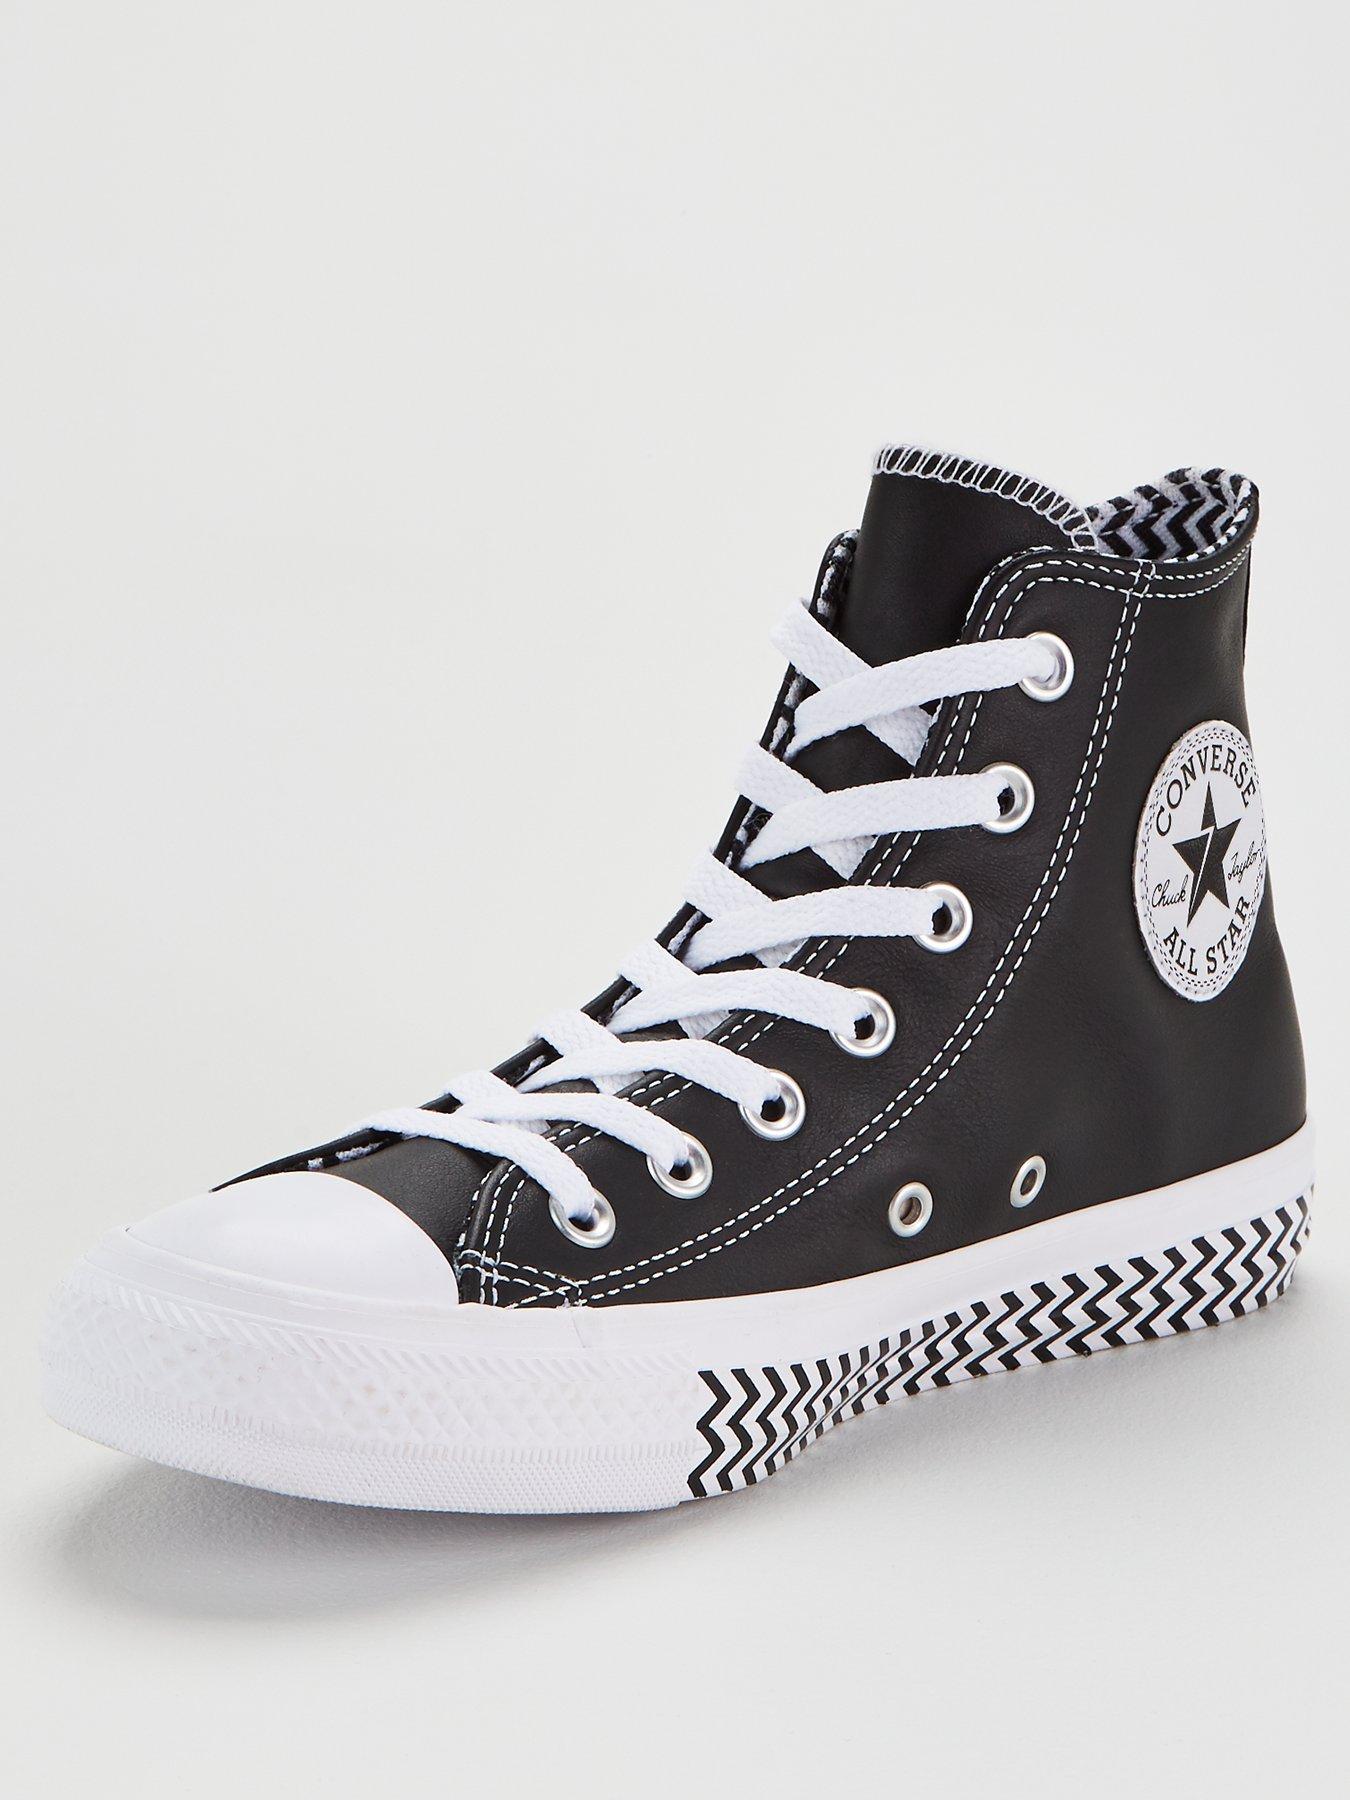 converse high tops size 3